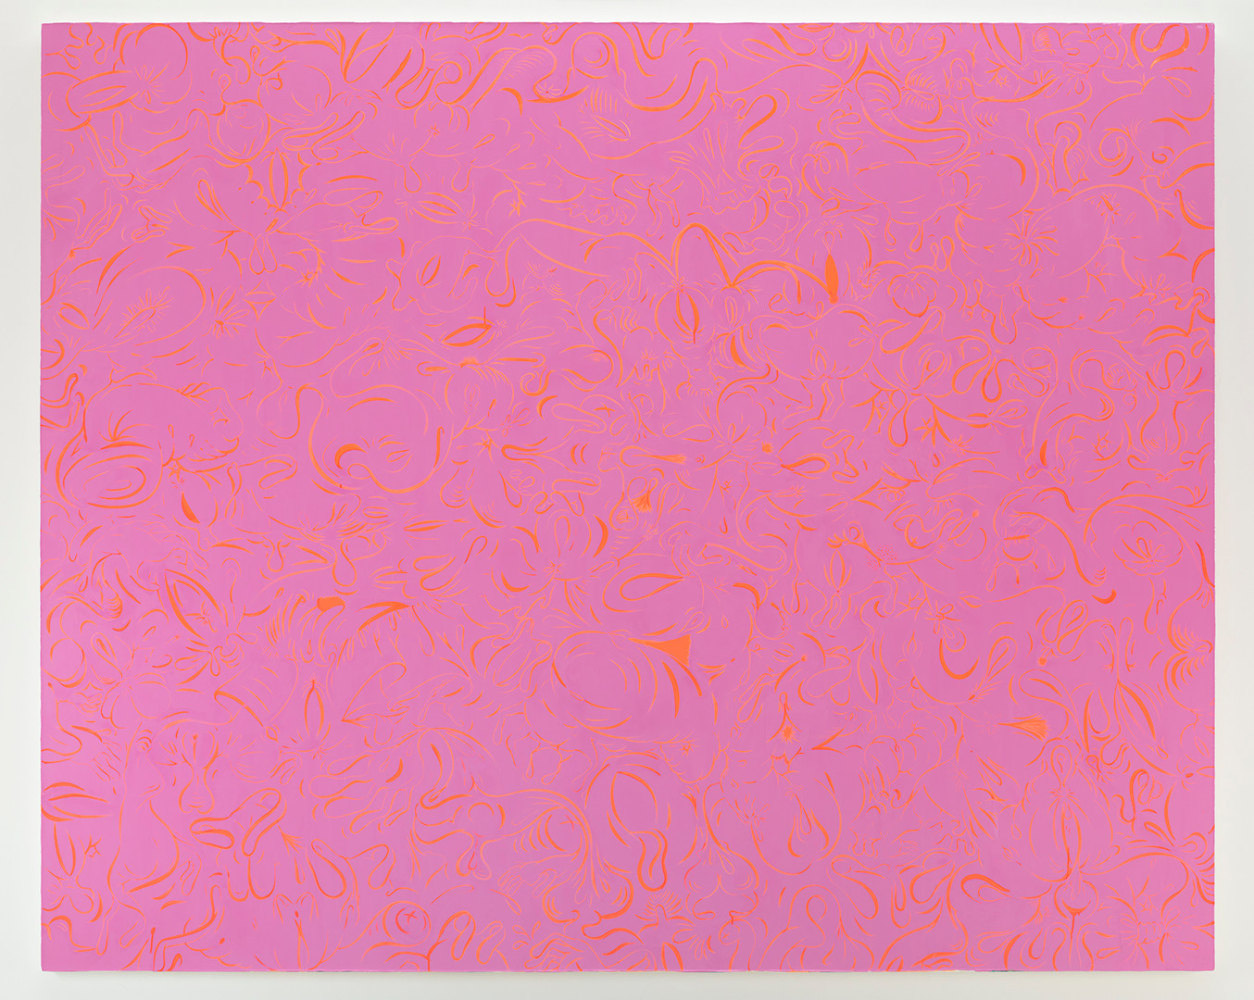 Sue Williams

Fluorescent and Flooby

2003

Oil and acrylic on canvas

84 x 104 1/4 inches (213.4 x 264.8 cm)

Signed, dated verso

SW 962

$165,000

&amp;nbsp;

INQUIRE

&amp;nbsp;